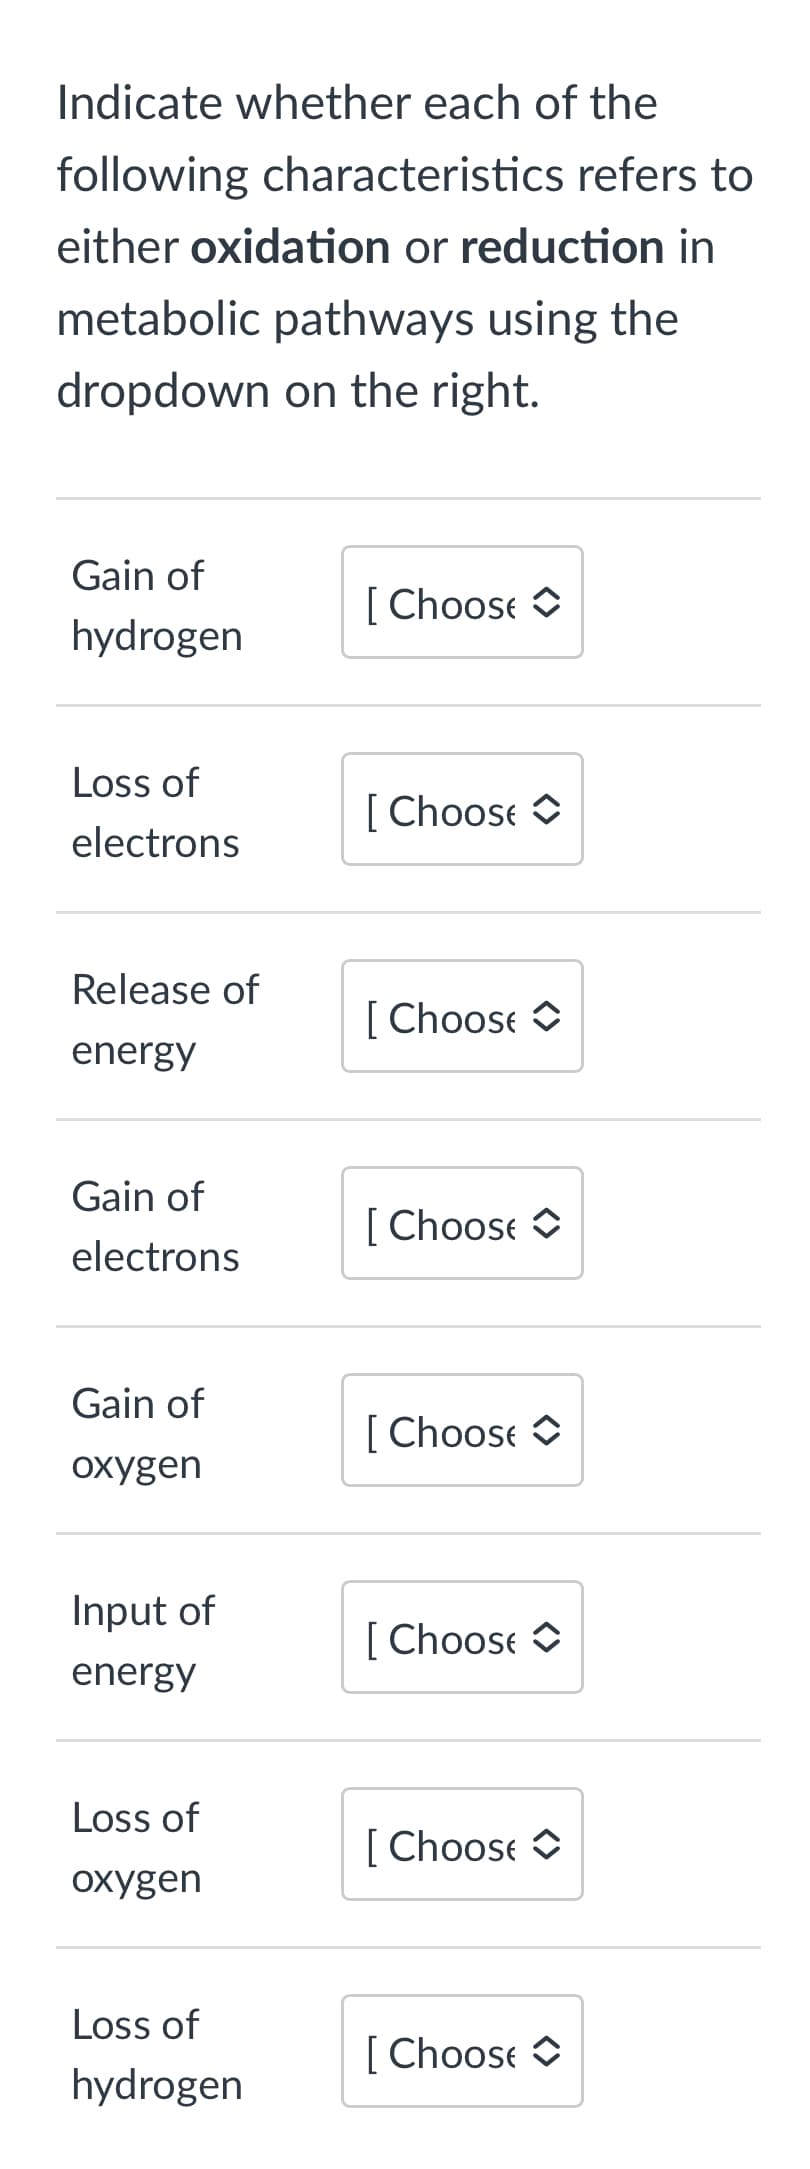 Indicate whether each of the
following characteristics refers to
either oxidation or reduction in
metabolic pathways using the
dropdown on the right.
Gain of
hydrogen
Loss of
electrons
Release of
energy
Gain of
electrons
Gain of
oxygen
Input of
energy
Loss of
oxygen
Loss of
hydrogen
[Choose
[Choose
[Choose C
[Choose C
[Choose C
[Choose C
[Choose
[Choose C